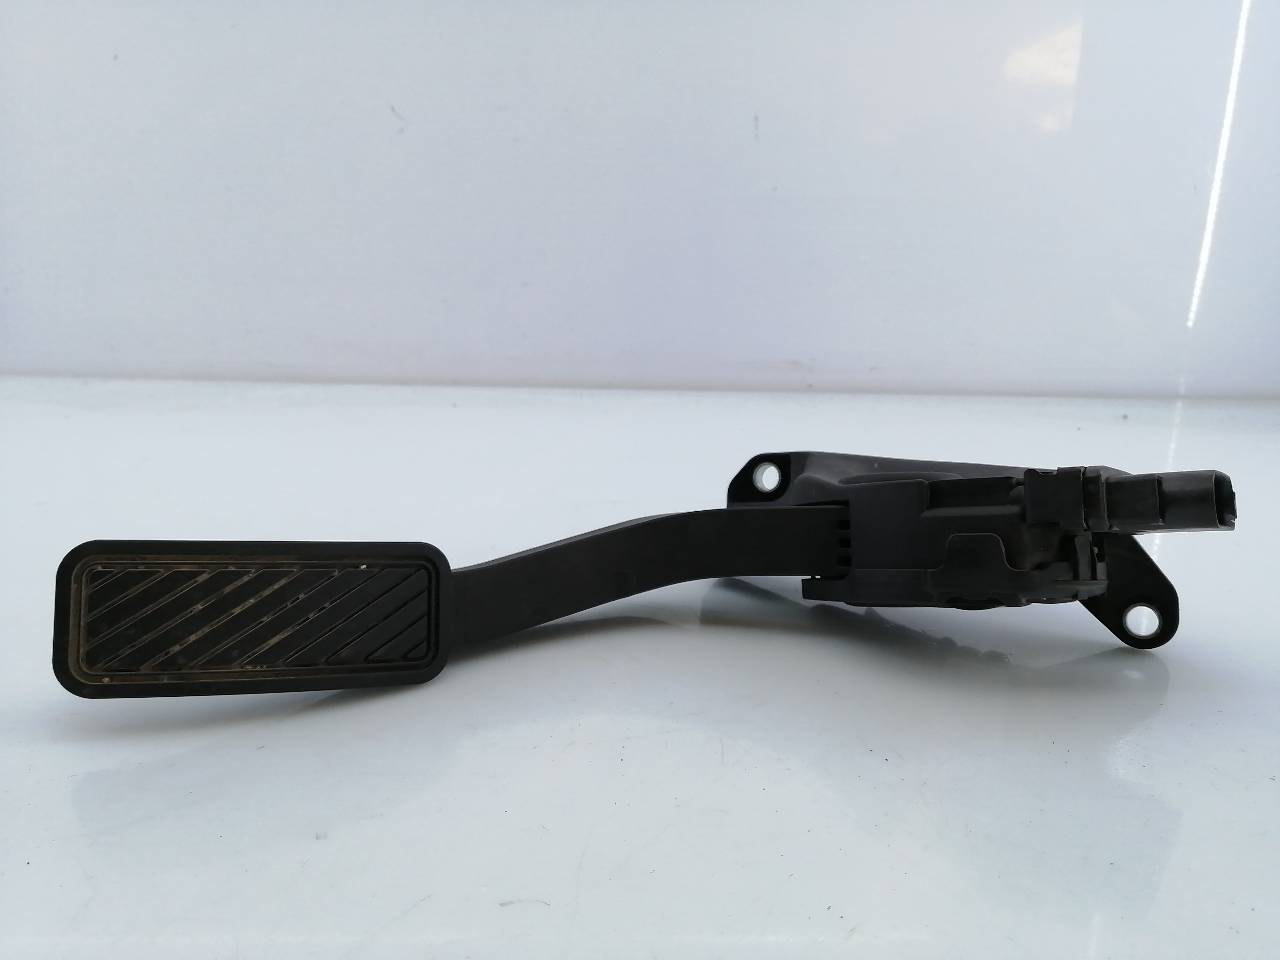 FORD Tourneo Courier 1 generation (2014-2024) Throttle Pedal 8V219F836AB, E3-B3-8-3 18721901